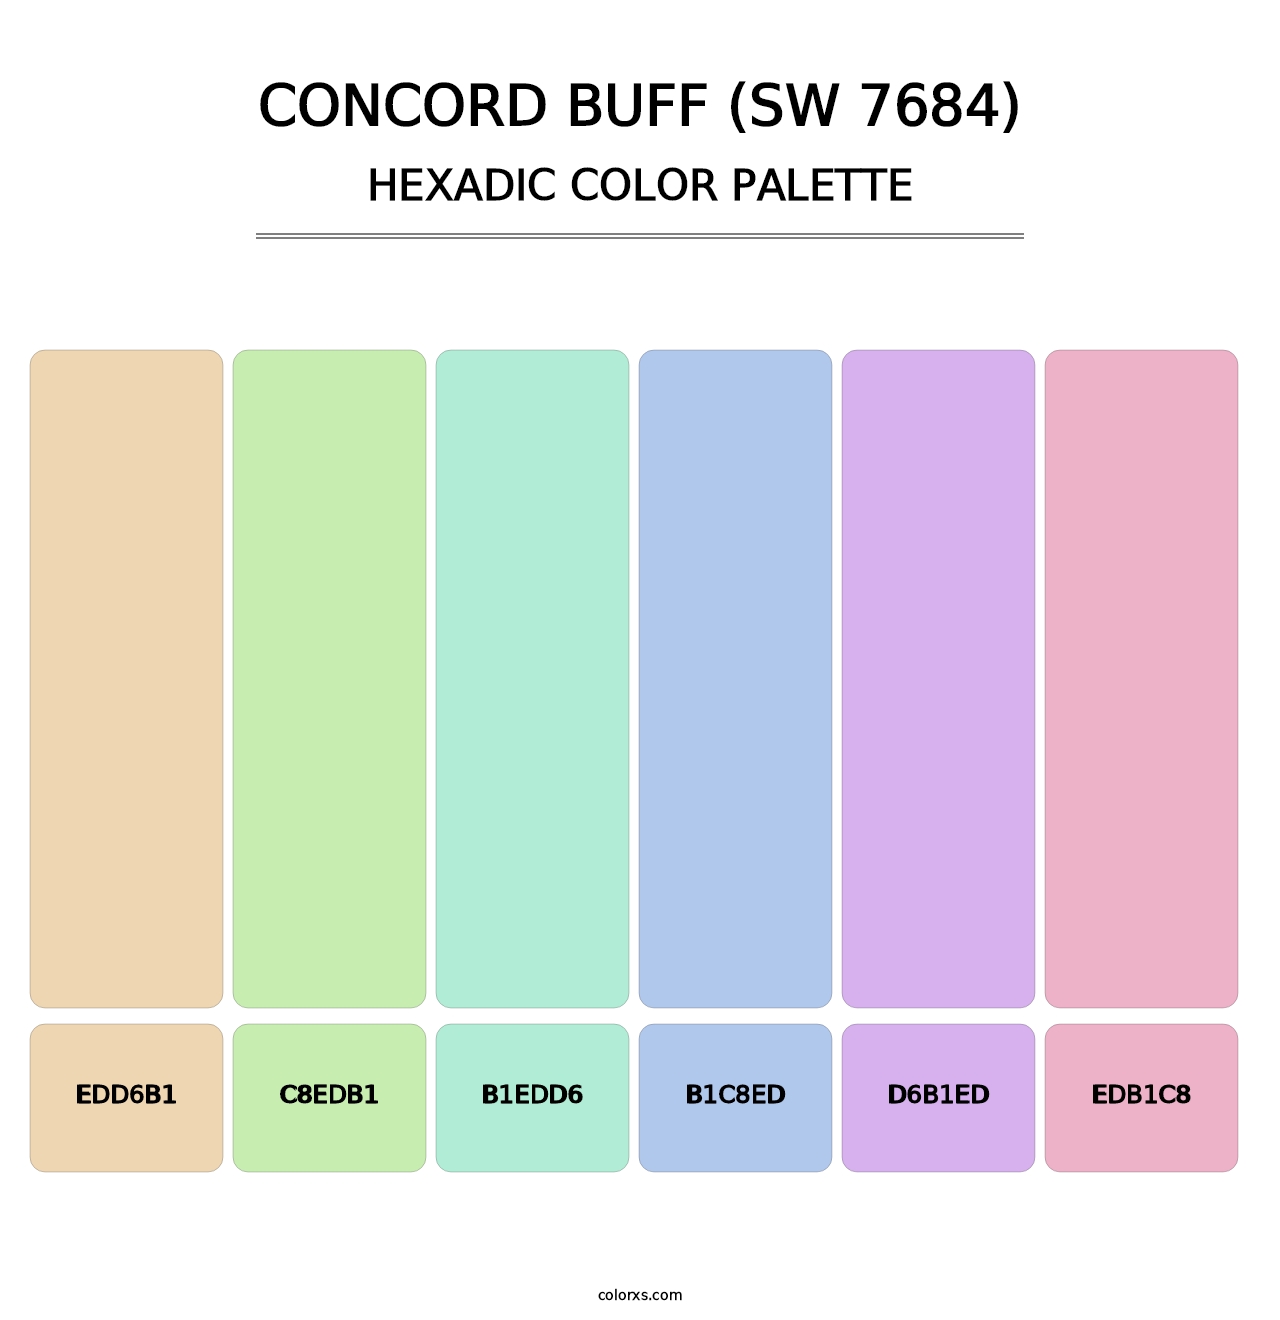 Concord Buff (SW 7684) - Hexadic Color Palette